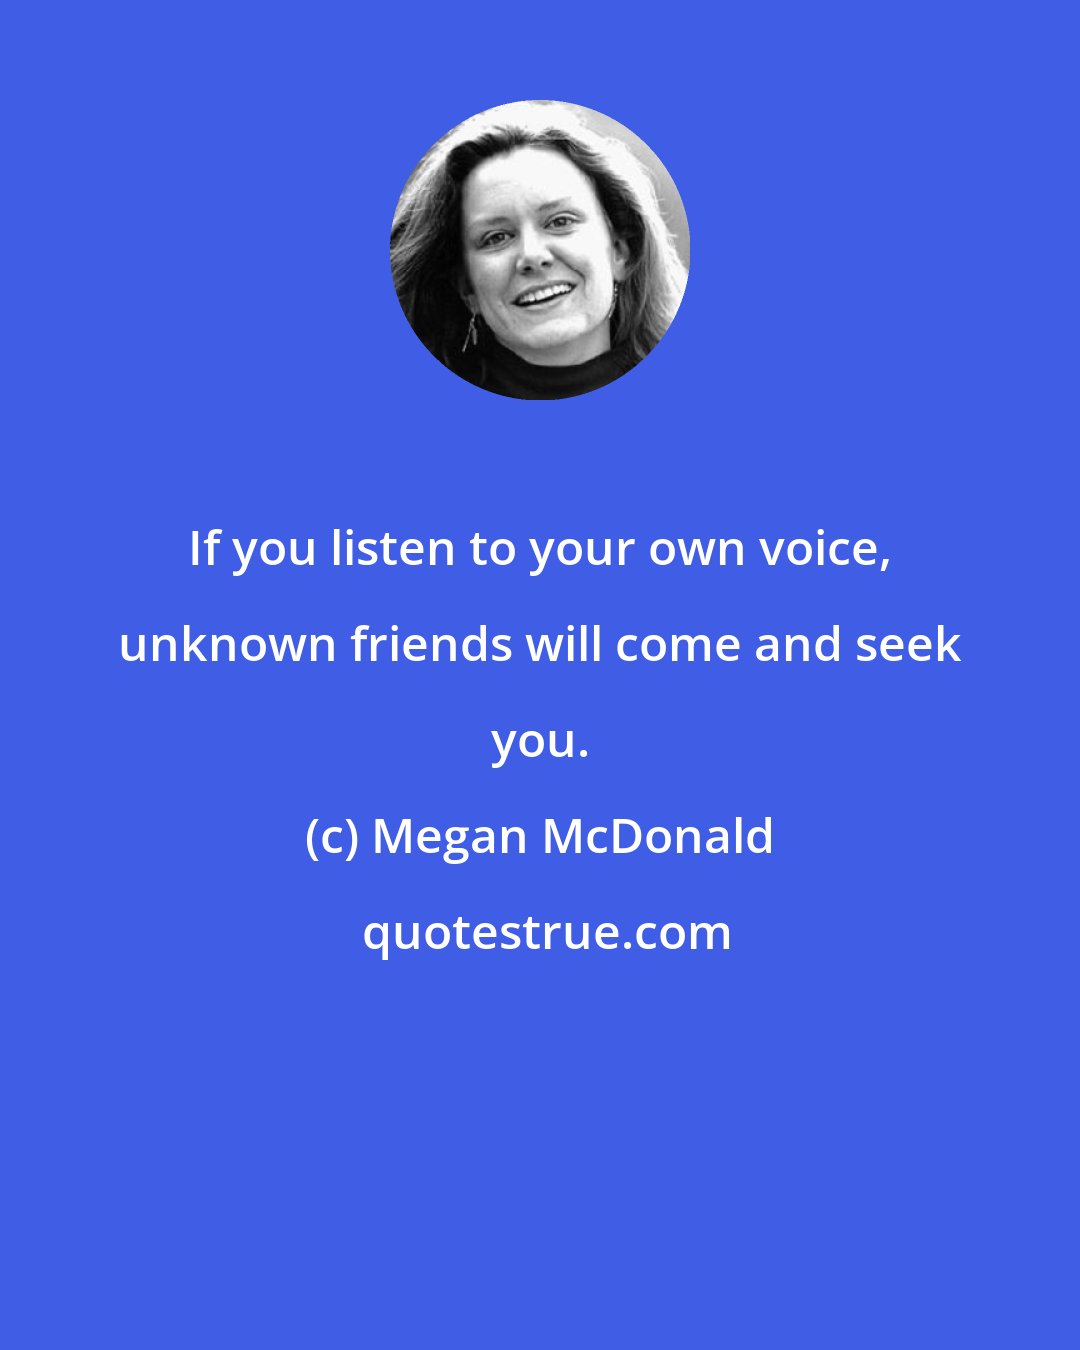 Megan McDonald: If you listen to your own voice, unknown friends will come and seek you.